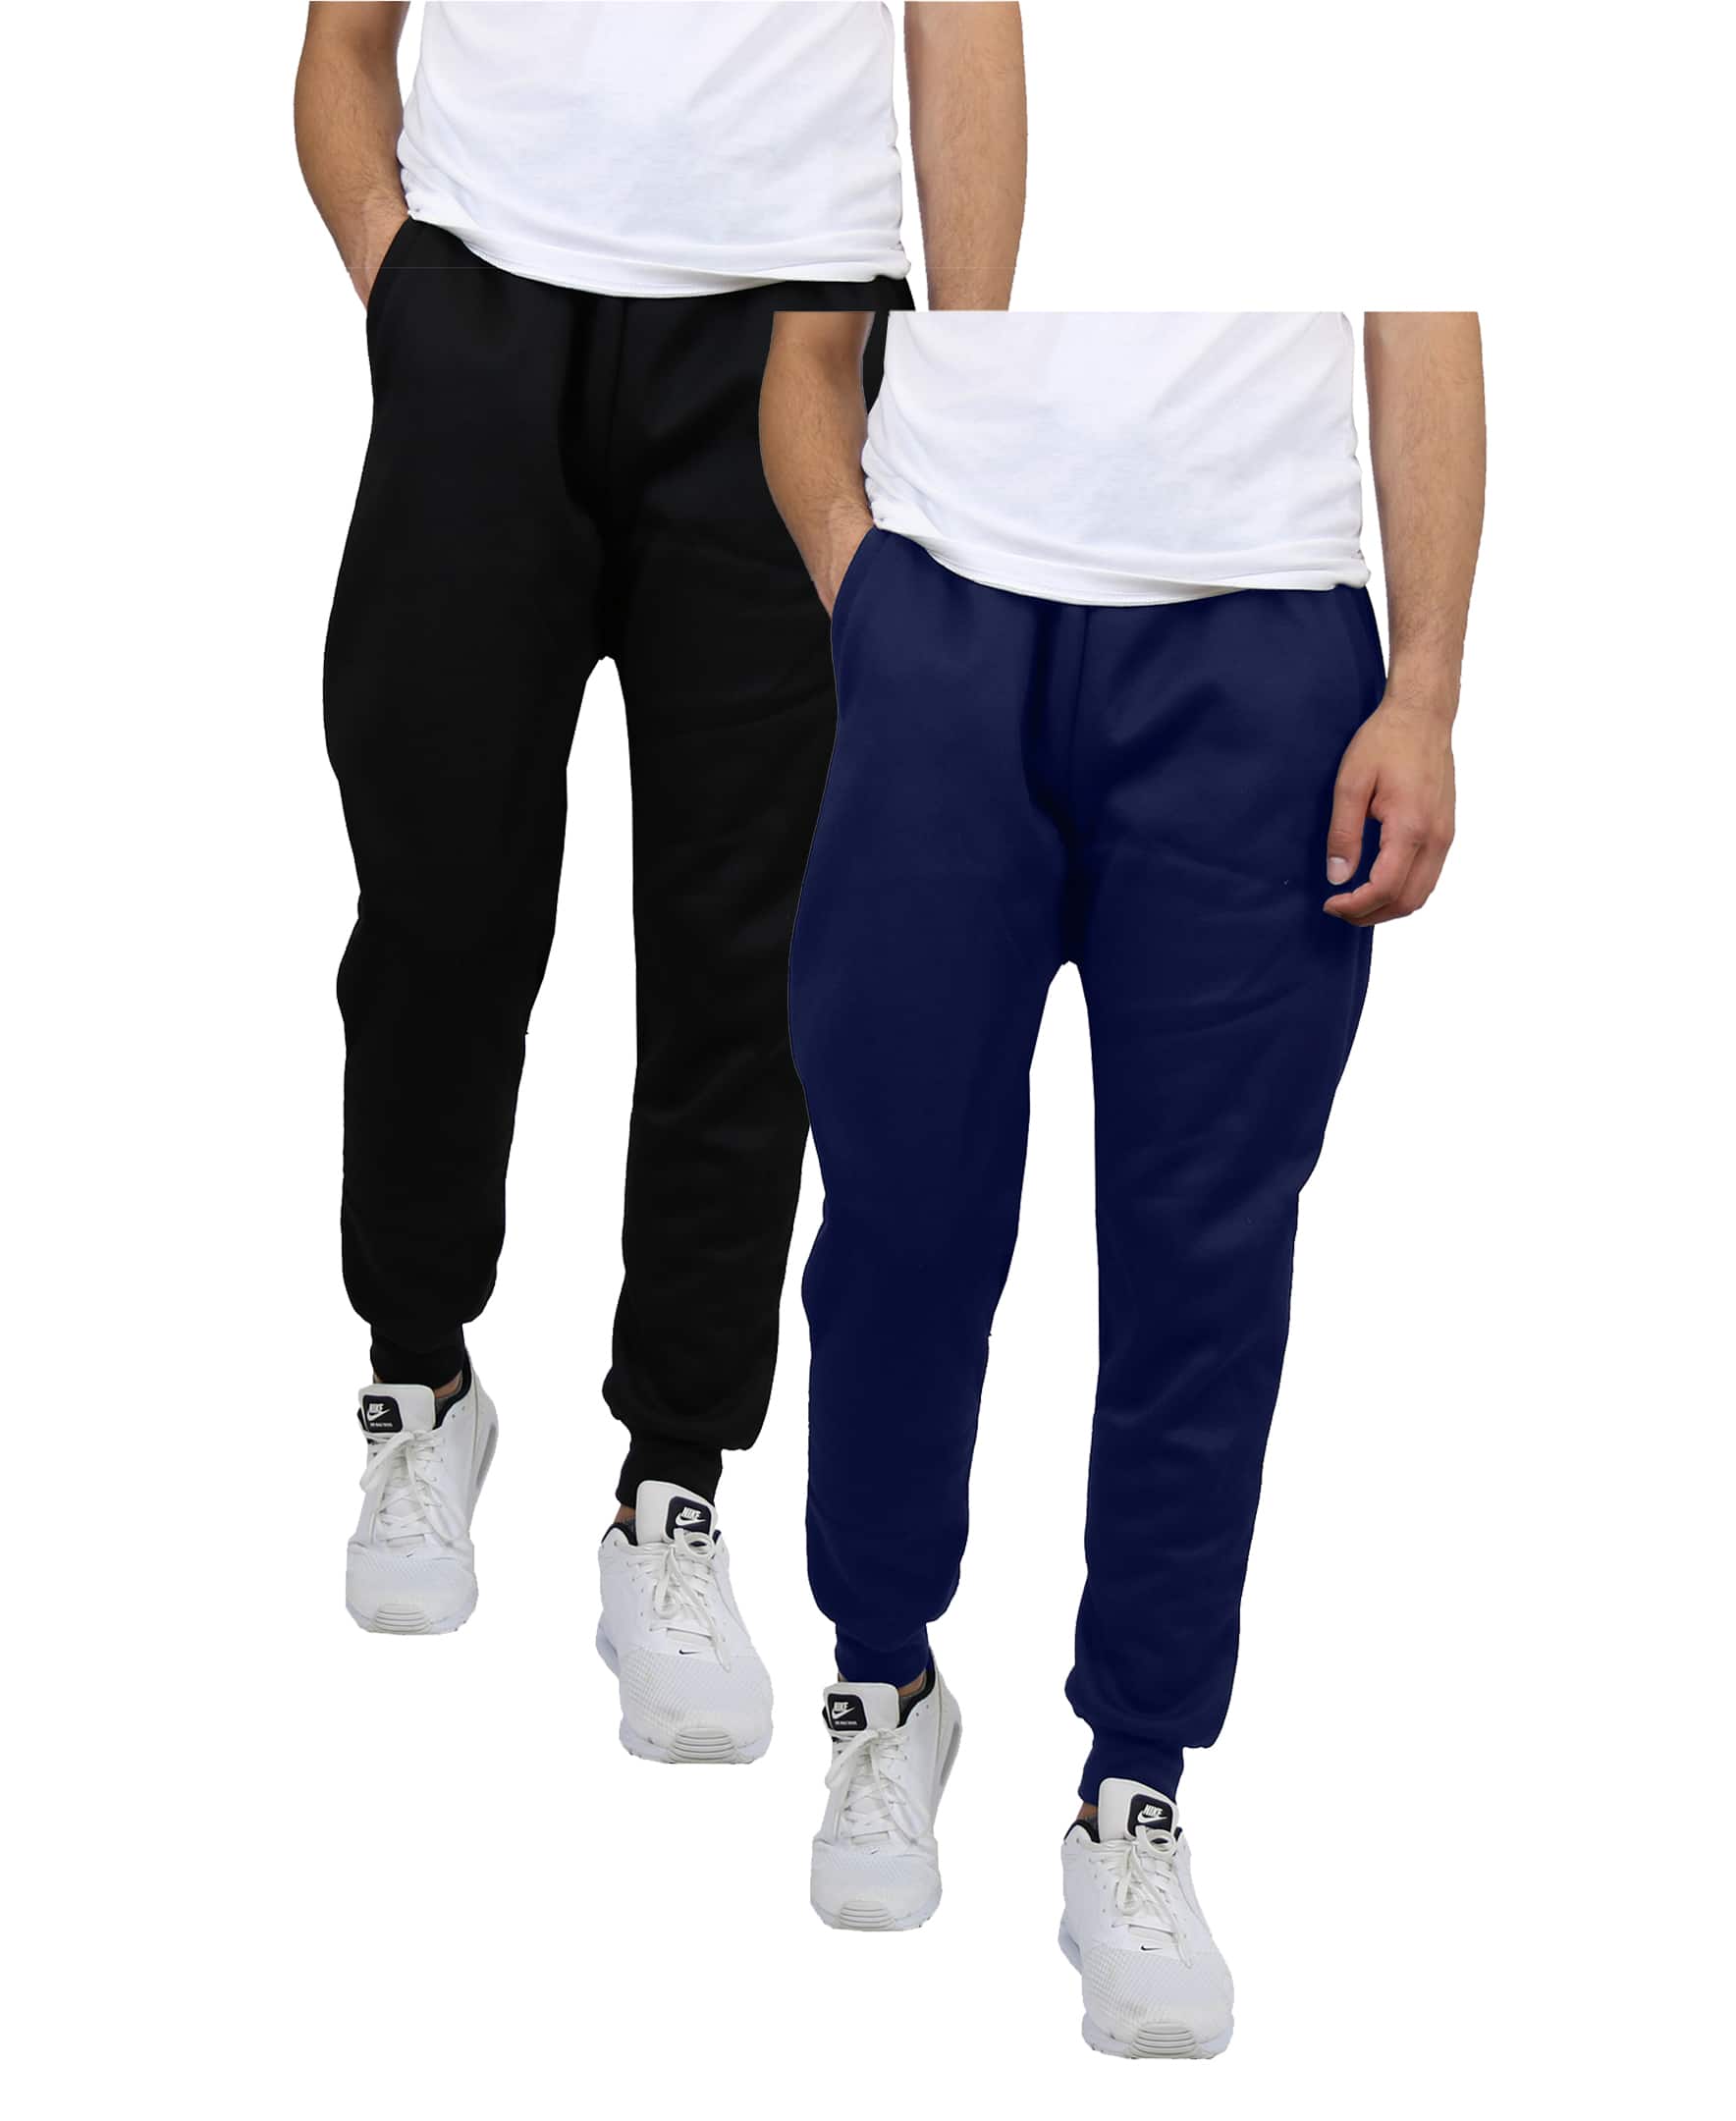 Galaxy by Harvic Men's Fleece-Lined Jogger Sweatpants 2 Pack | Bottoms ...